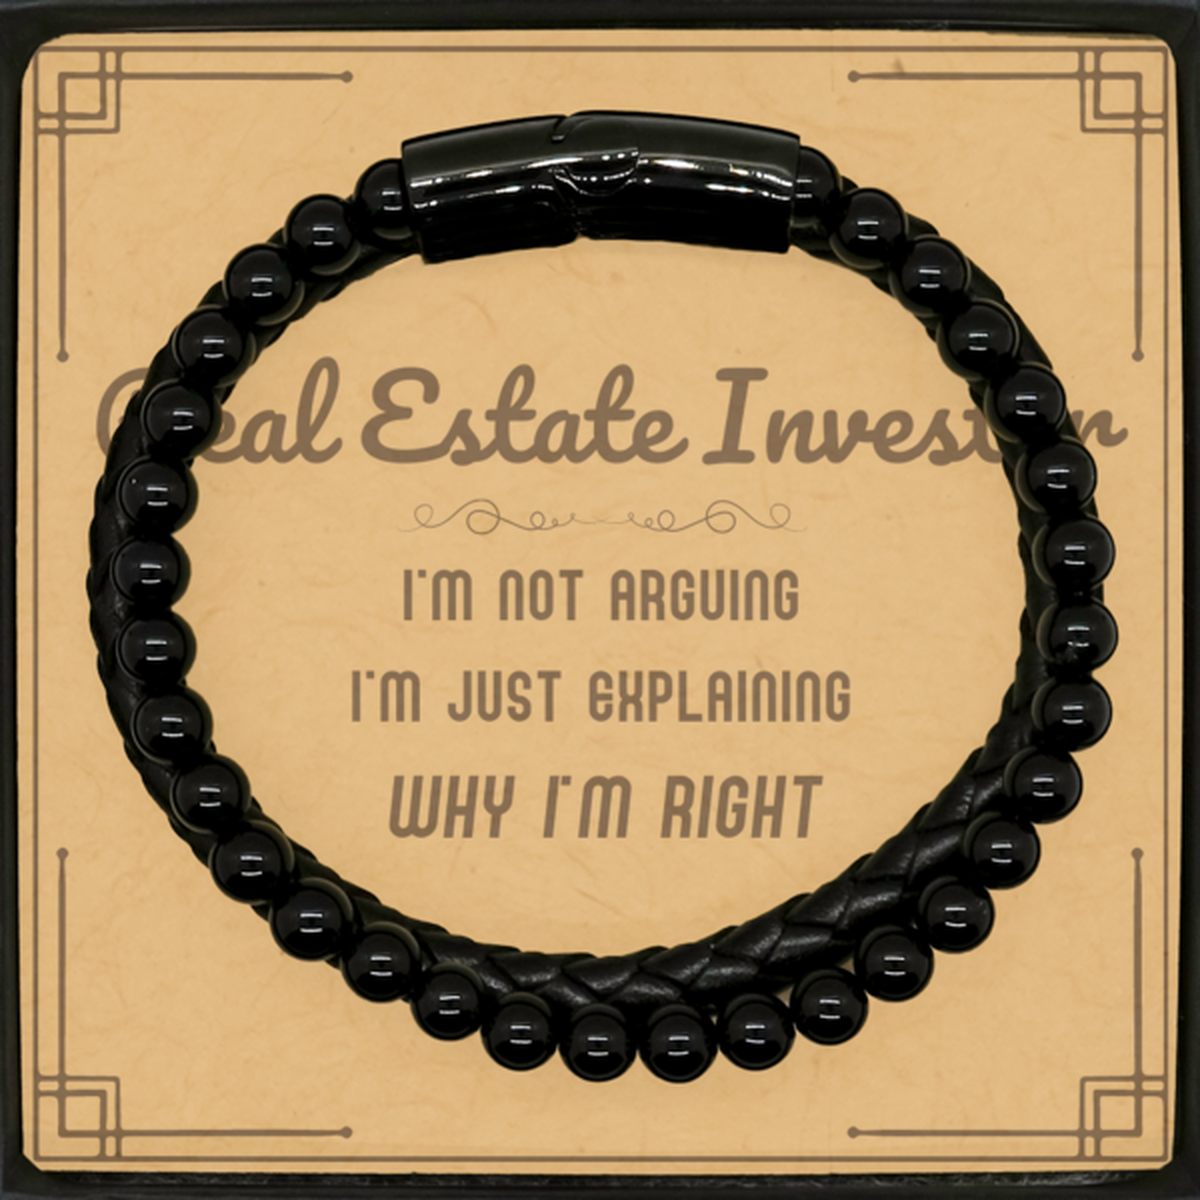 Real Estate Investor I'm not Arguing. I'm Just Explaining Why I'm RIGHT Stone Leather Bracelets, Funny Saying Quote Real Estate Investor Gifts For Real Estate Investor Message Card Graduation Birthday Christmas Gifts for Men Women Coworker